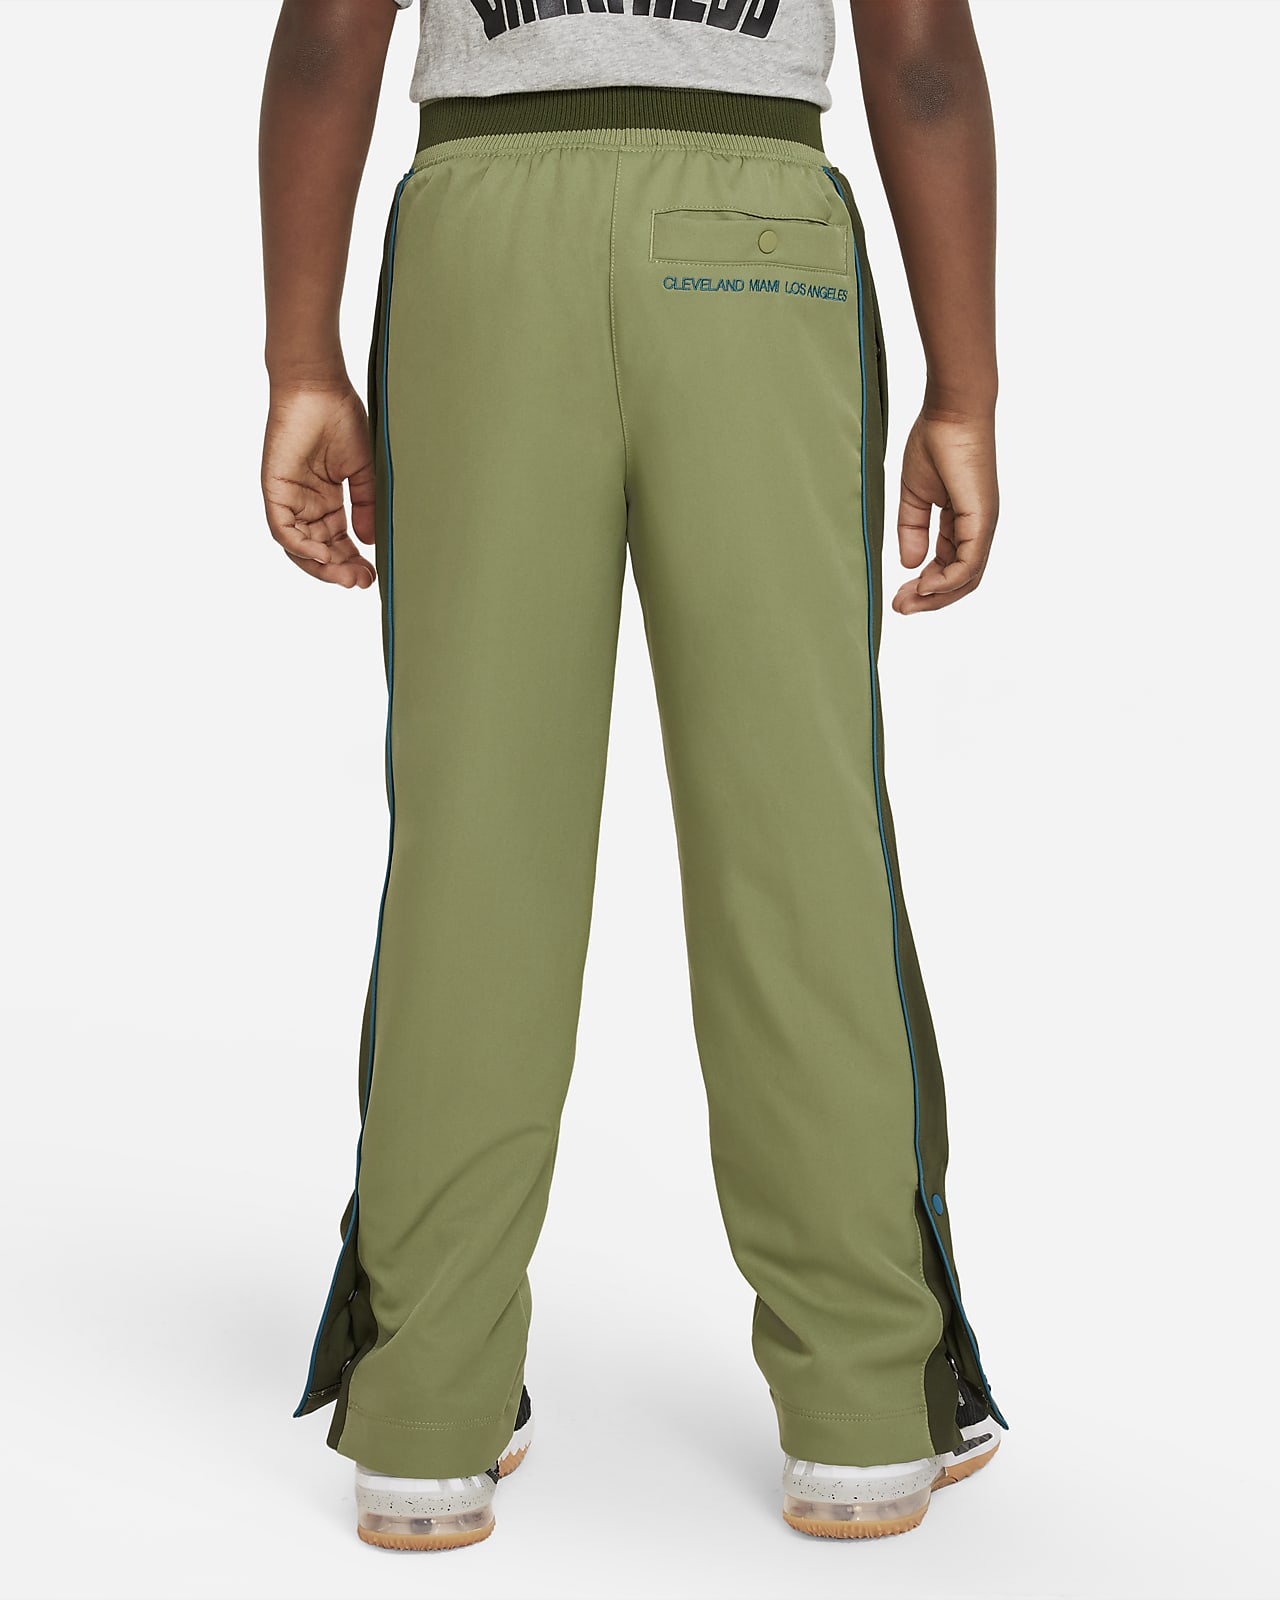 New Balance Track Pants - Buy New Balance Track Pants online in India